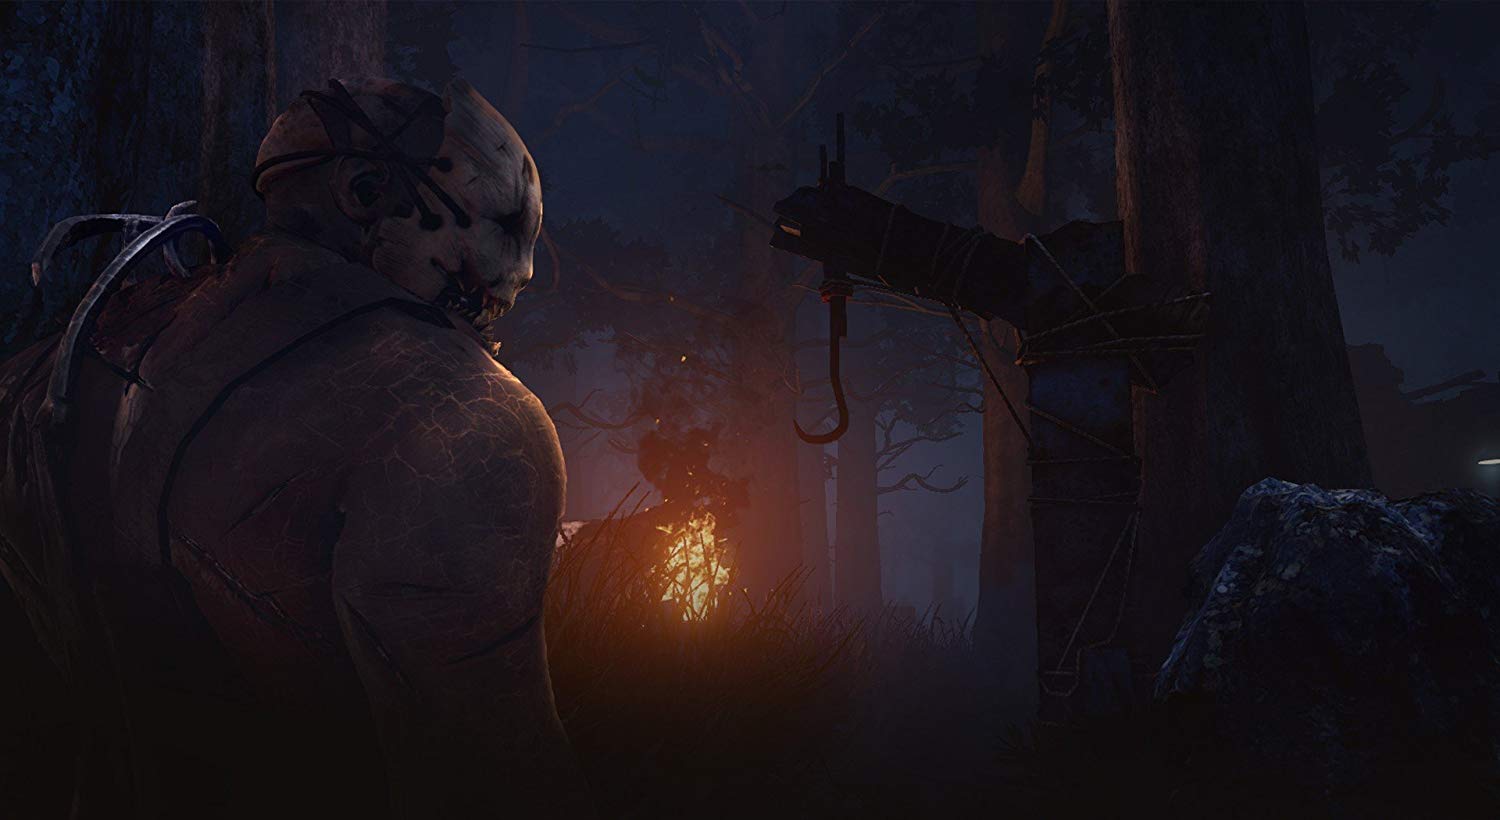 Dead by daylight review